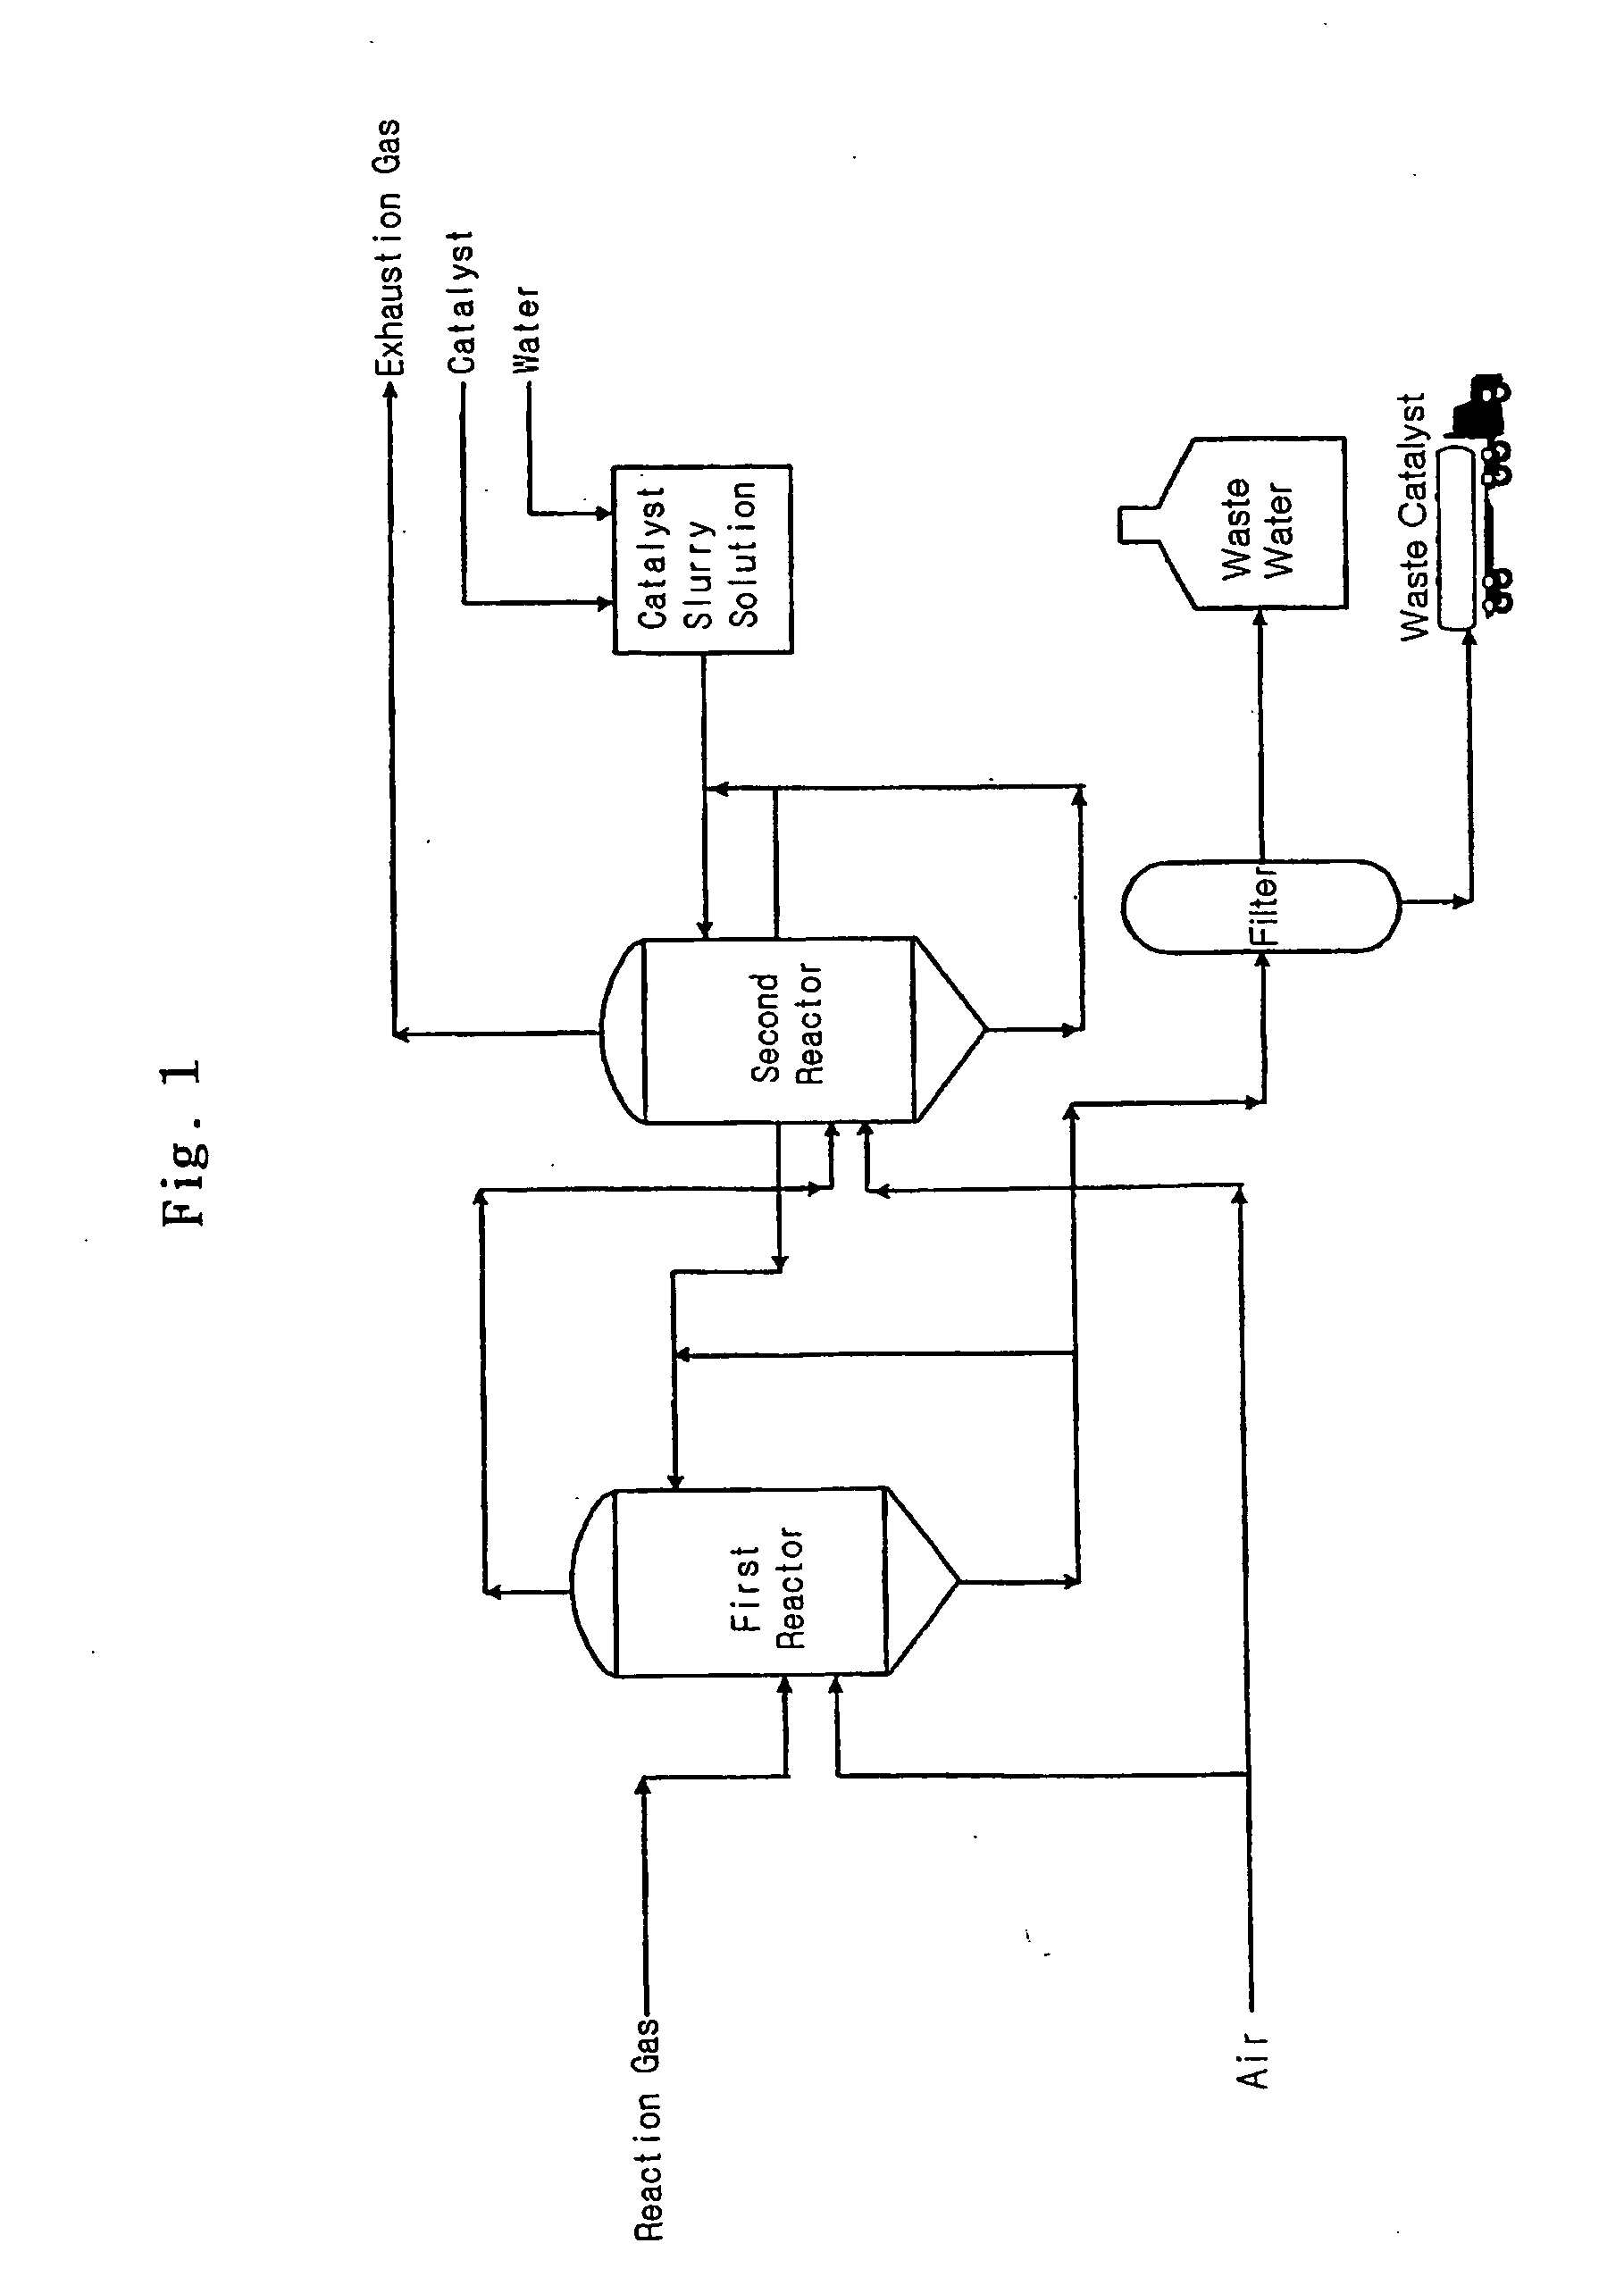 Desulfurizartion for Simultaneous Removal of Hydrogen Sulfide and Sulfur Dioxide